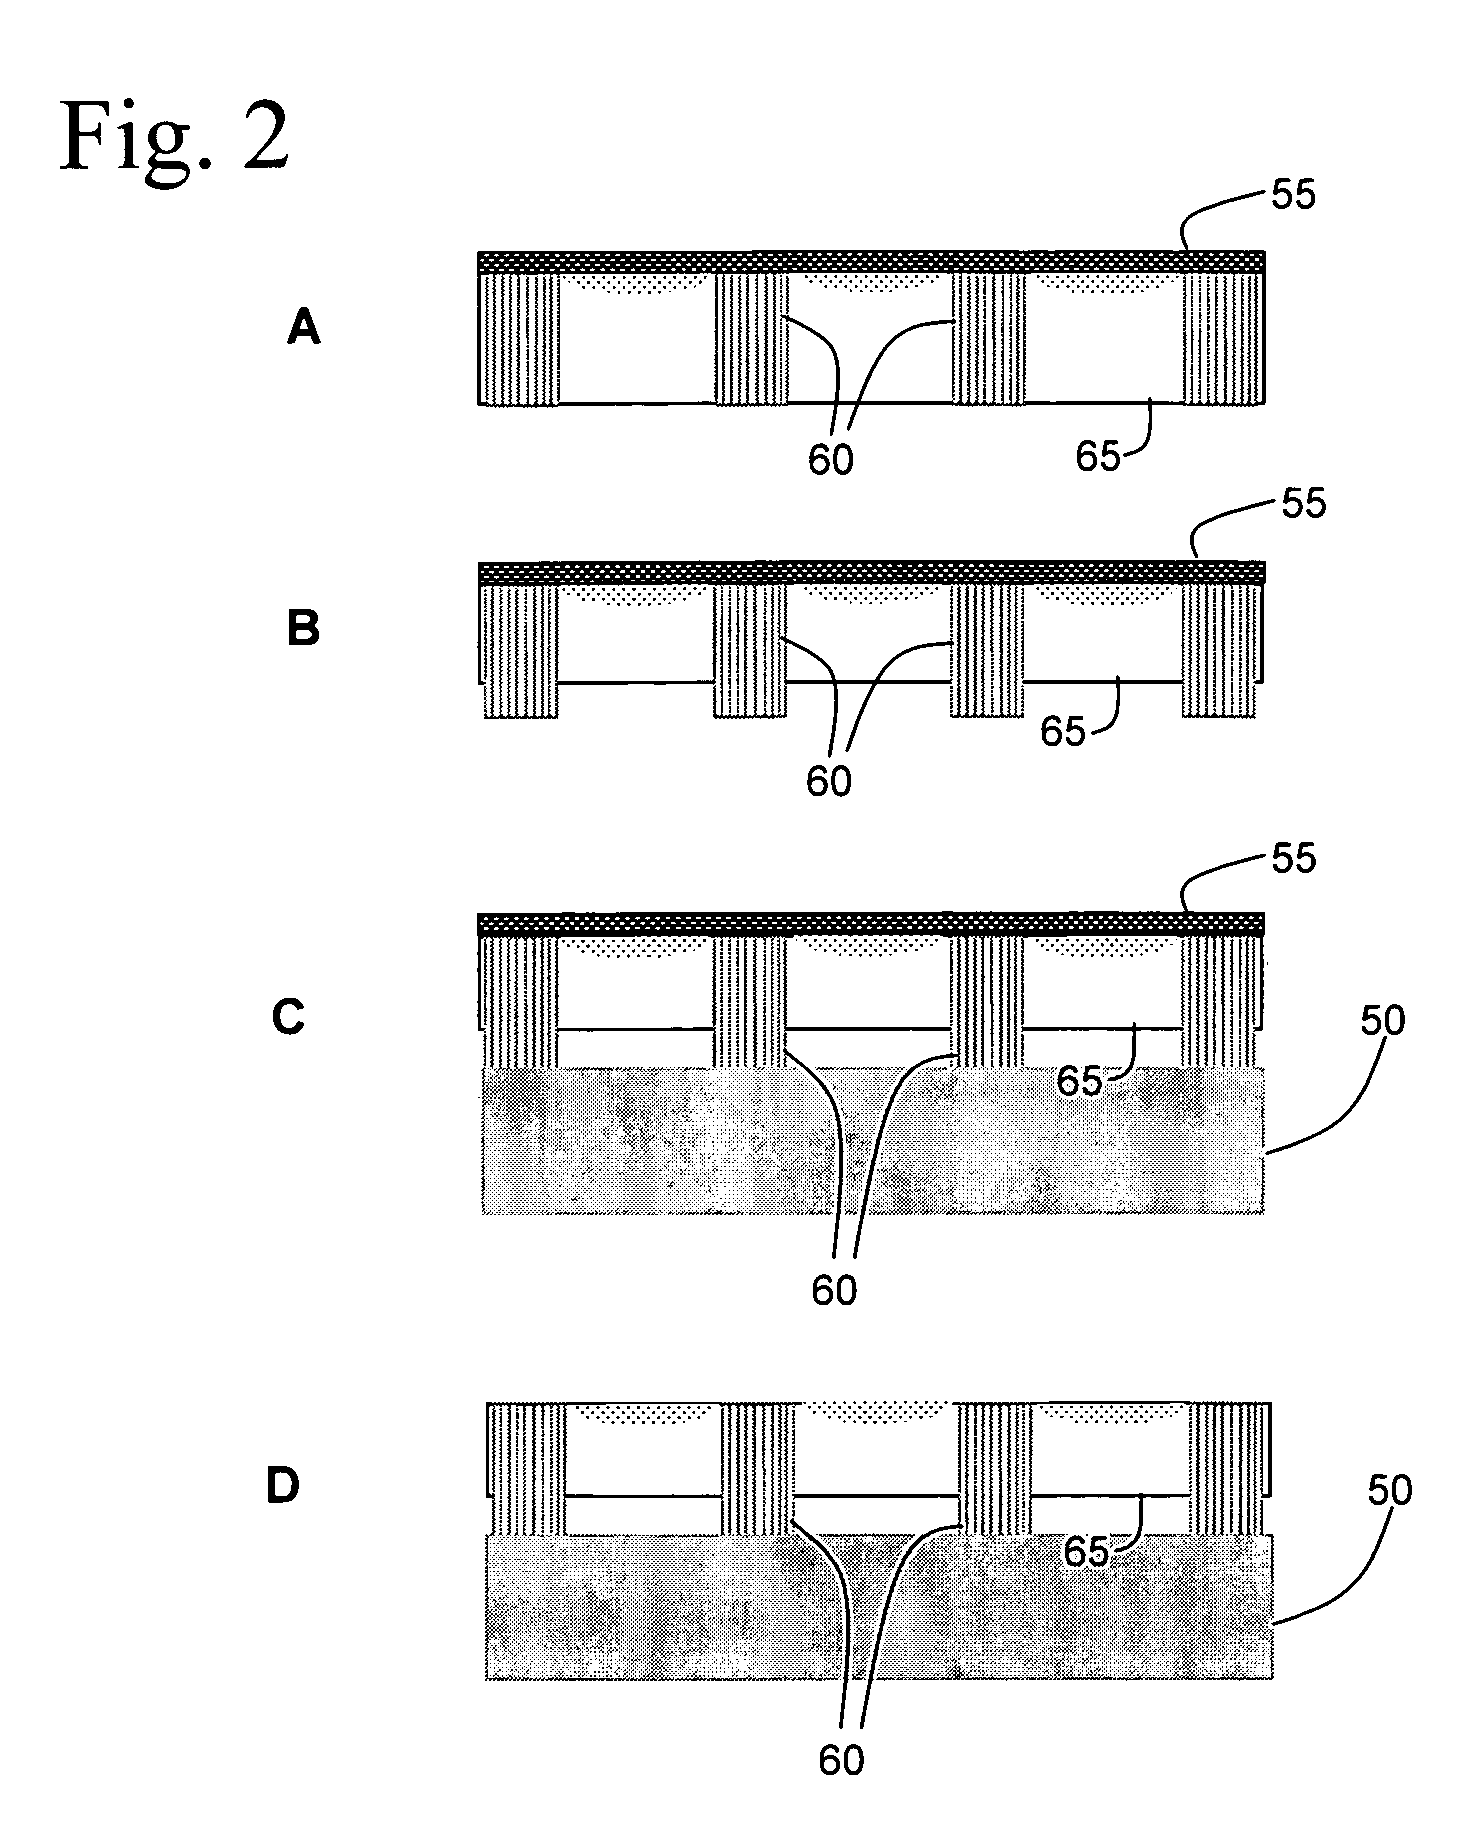 Method for the assembly of nanowire interconnects